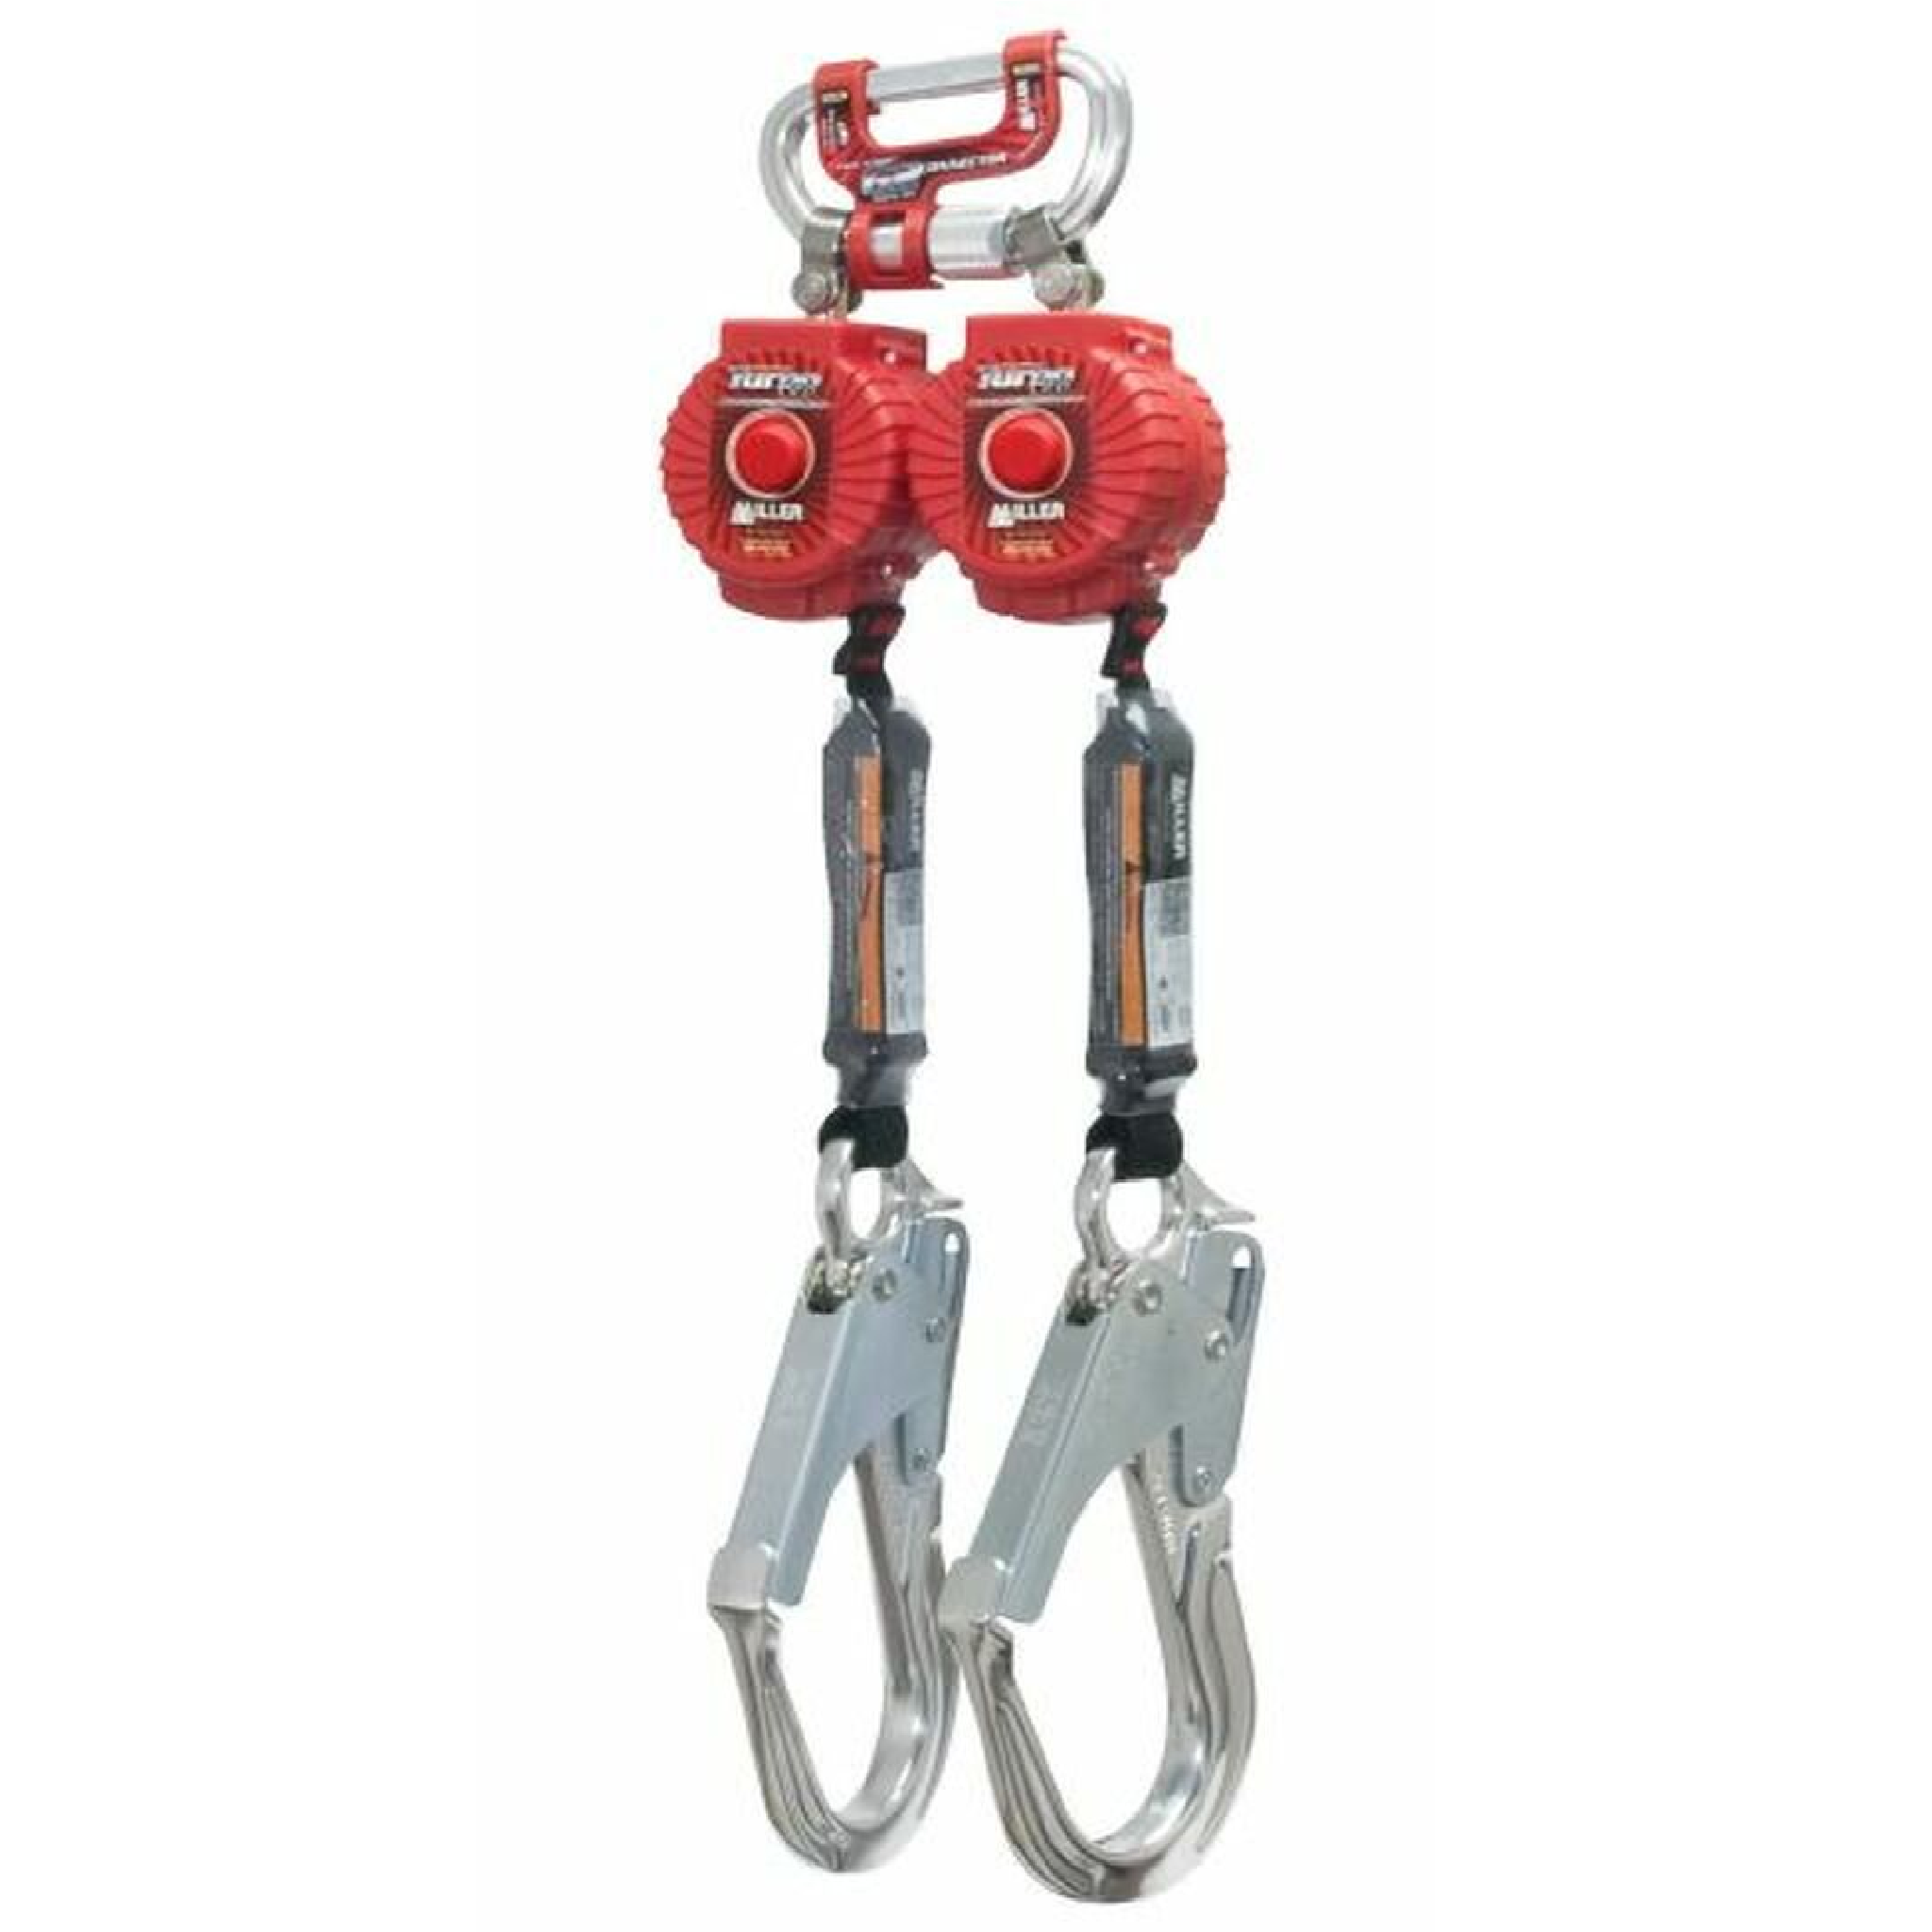 Miller TWIN TURBO Fall Protection SCAFFOLD Hooks With SELF RETRACTABLE Lifeline PLUS G2 CONNECTOR